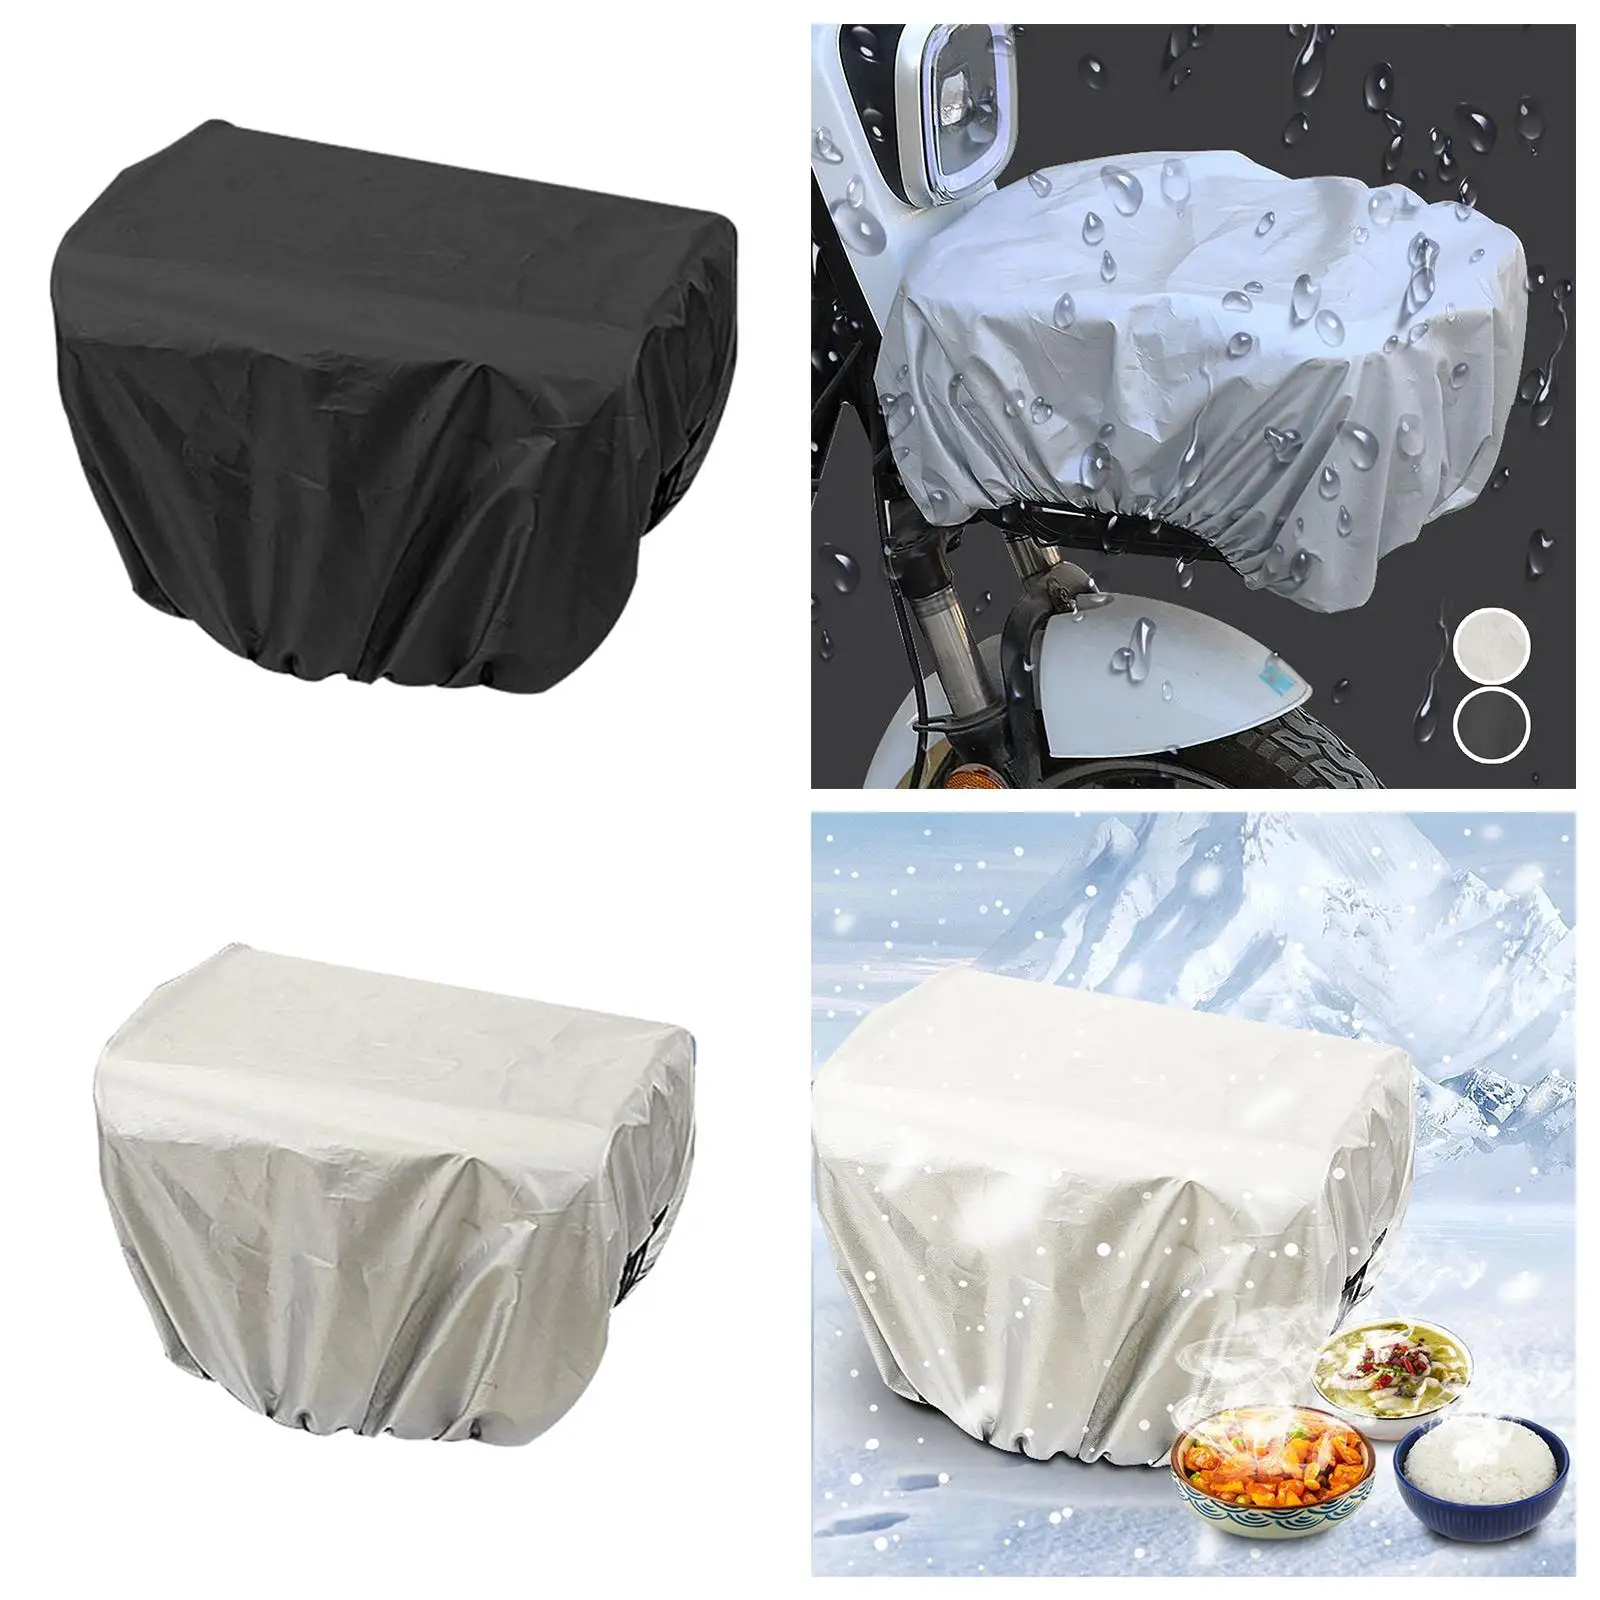 Bike Basket Cover Basket Liner for Women Motorcycles Most Bicycle Baskets